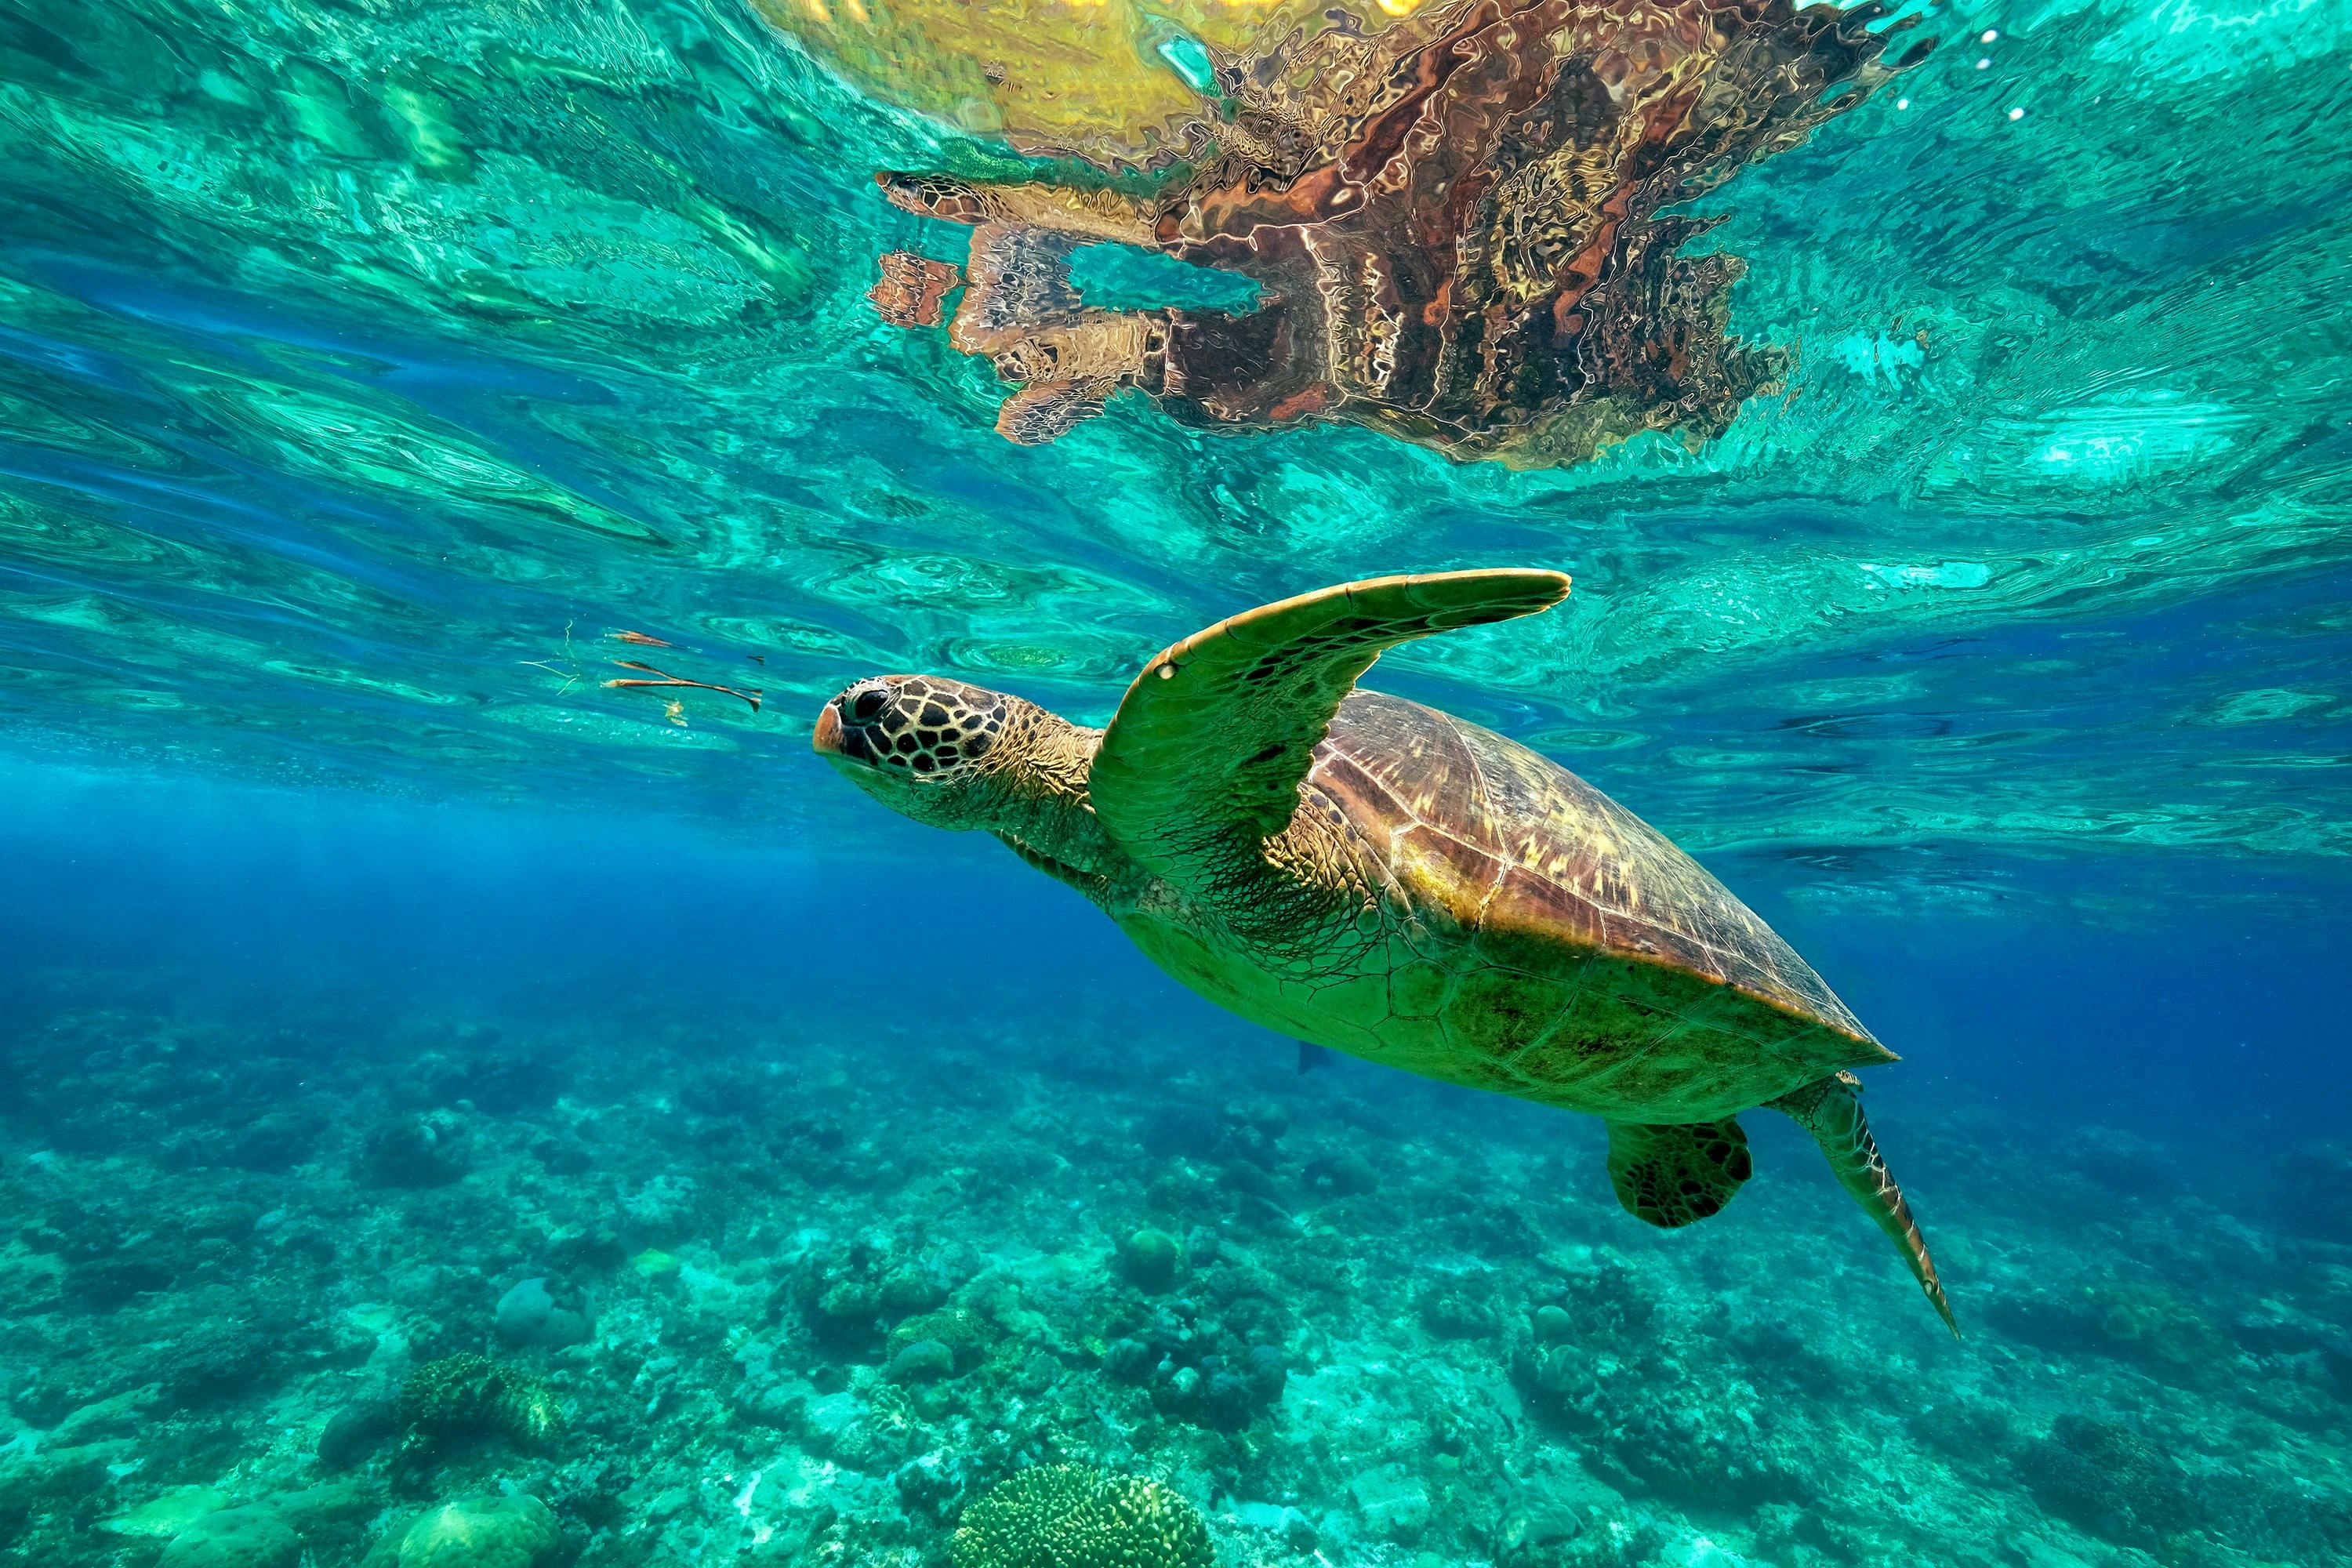 A sea turtle in the clear blue waters of Apo Island